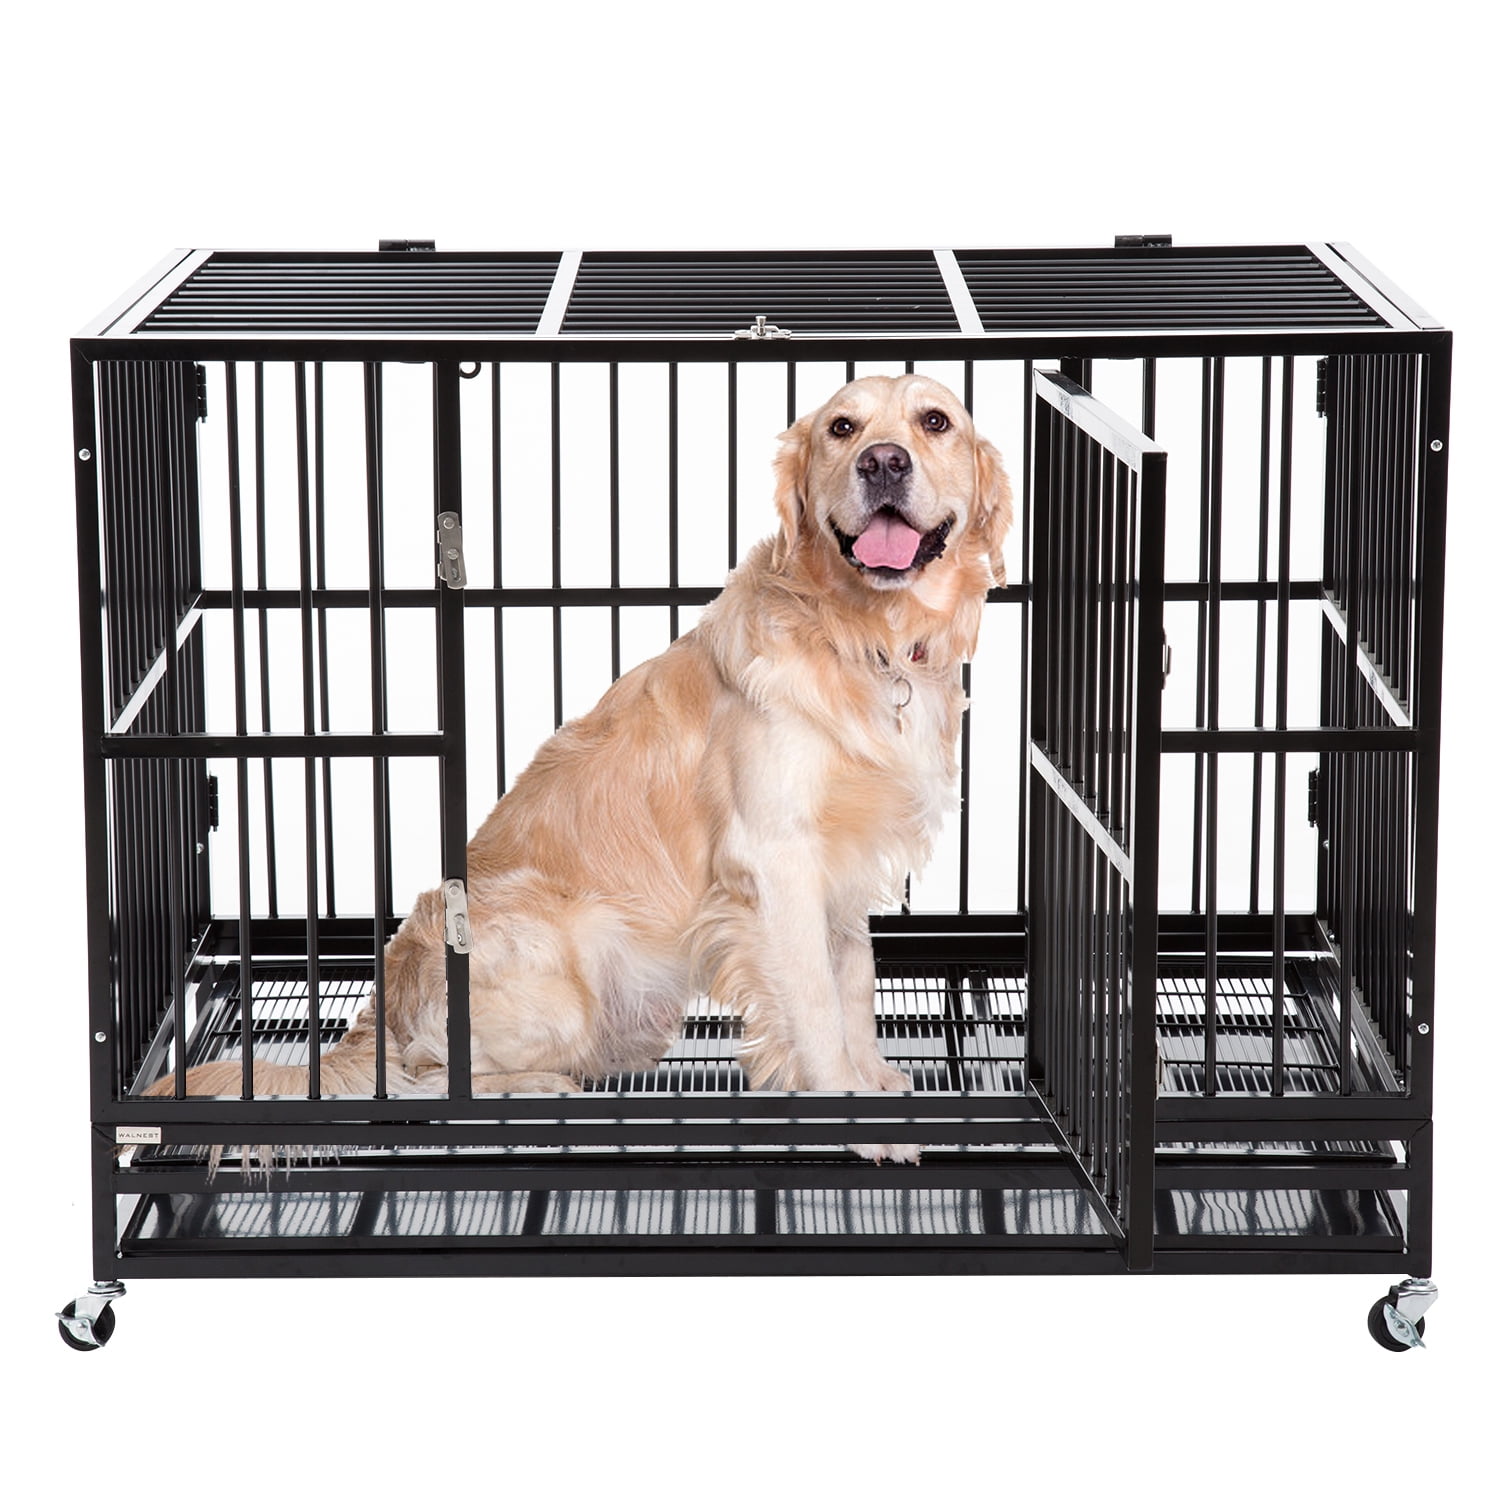 48 Inch Home Discount Pet Cage Metal Folding Dog Puppy Animal Crate Vet Car Training Carrier With Tray 